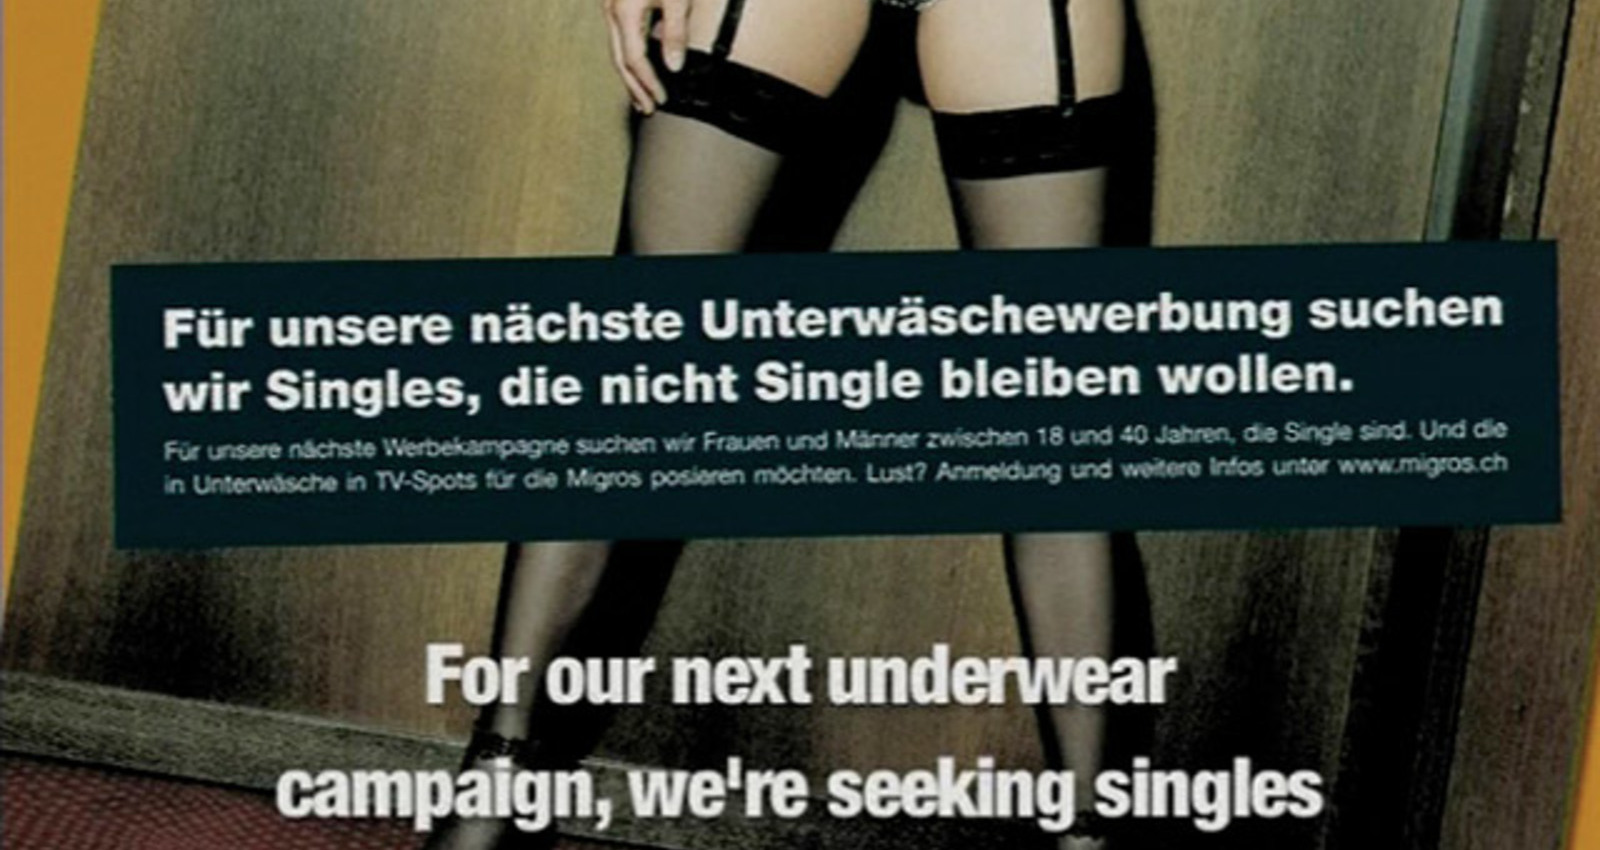 The First Underwear Models with Email Contact